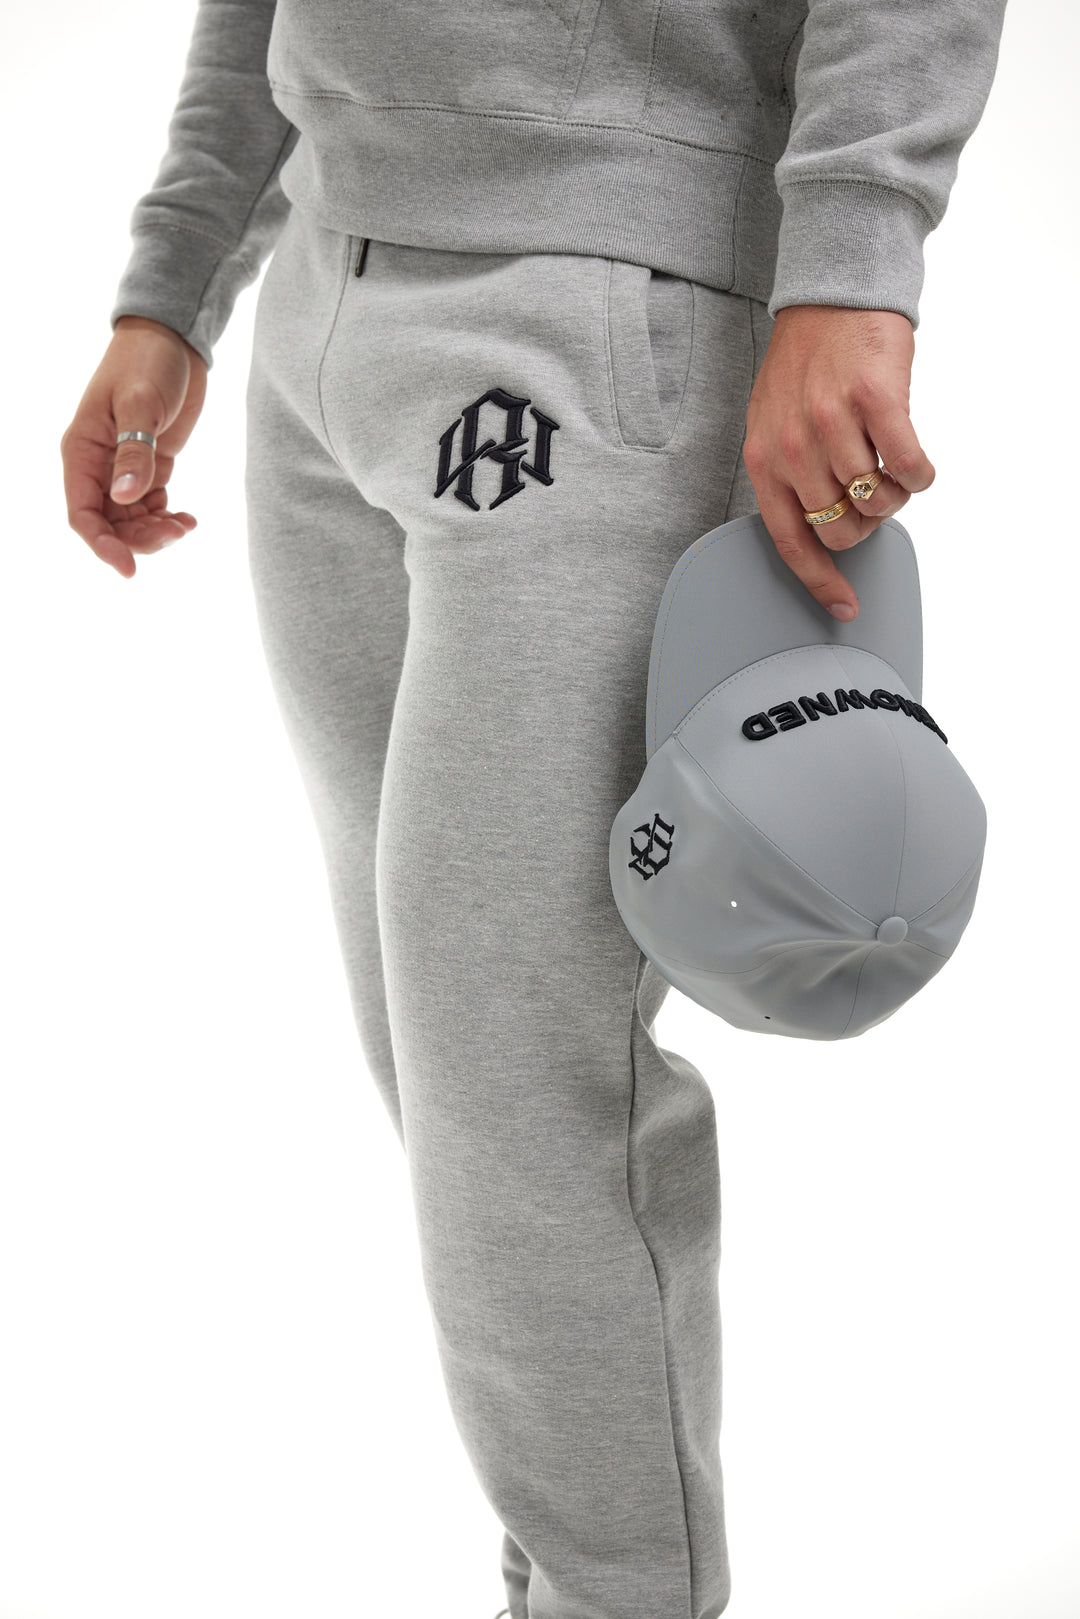 Premium Heather Grey 400gsm Heavyweight Sweatpants modeled by a young man